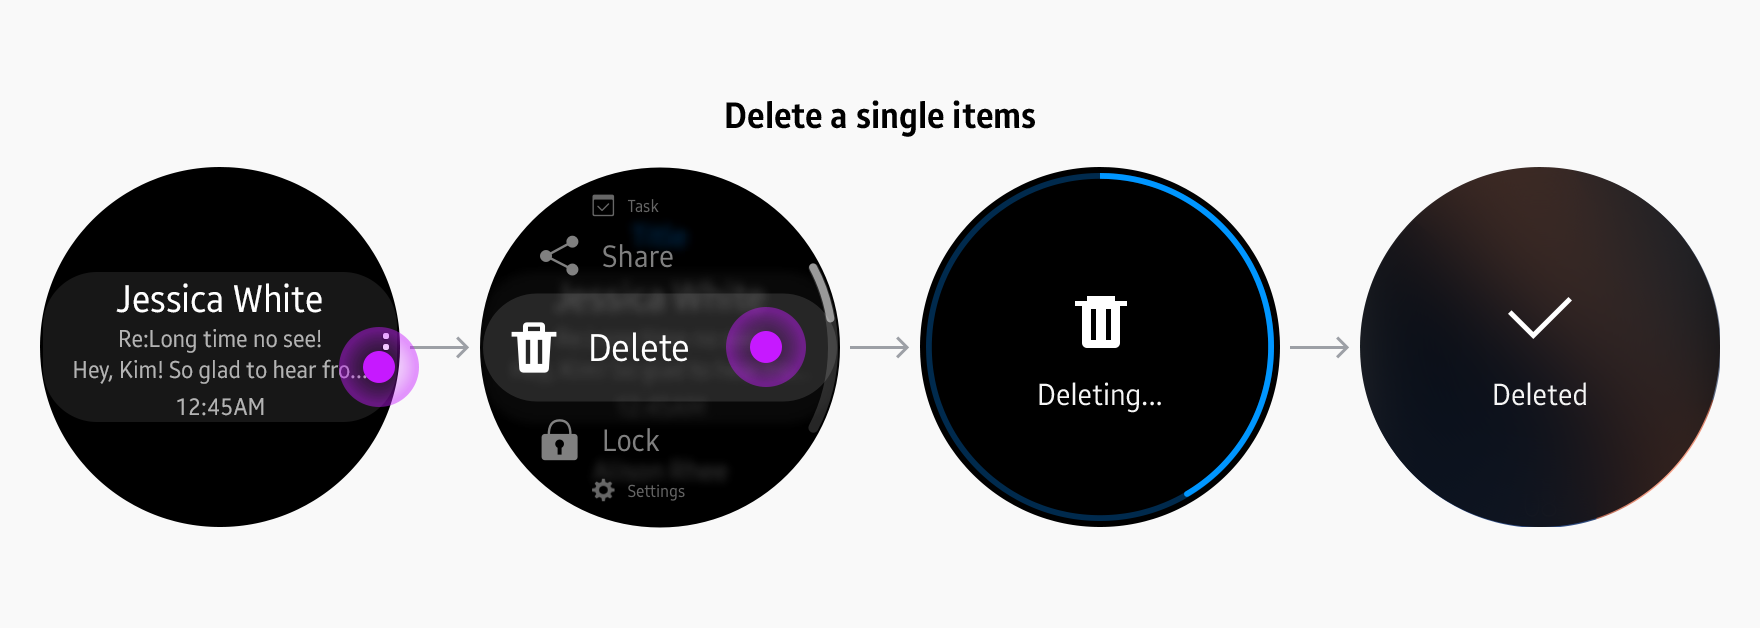 sers can access the Delete button through more options. Either multiselection or single selection is available, depending on the content.